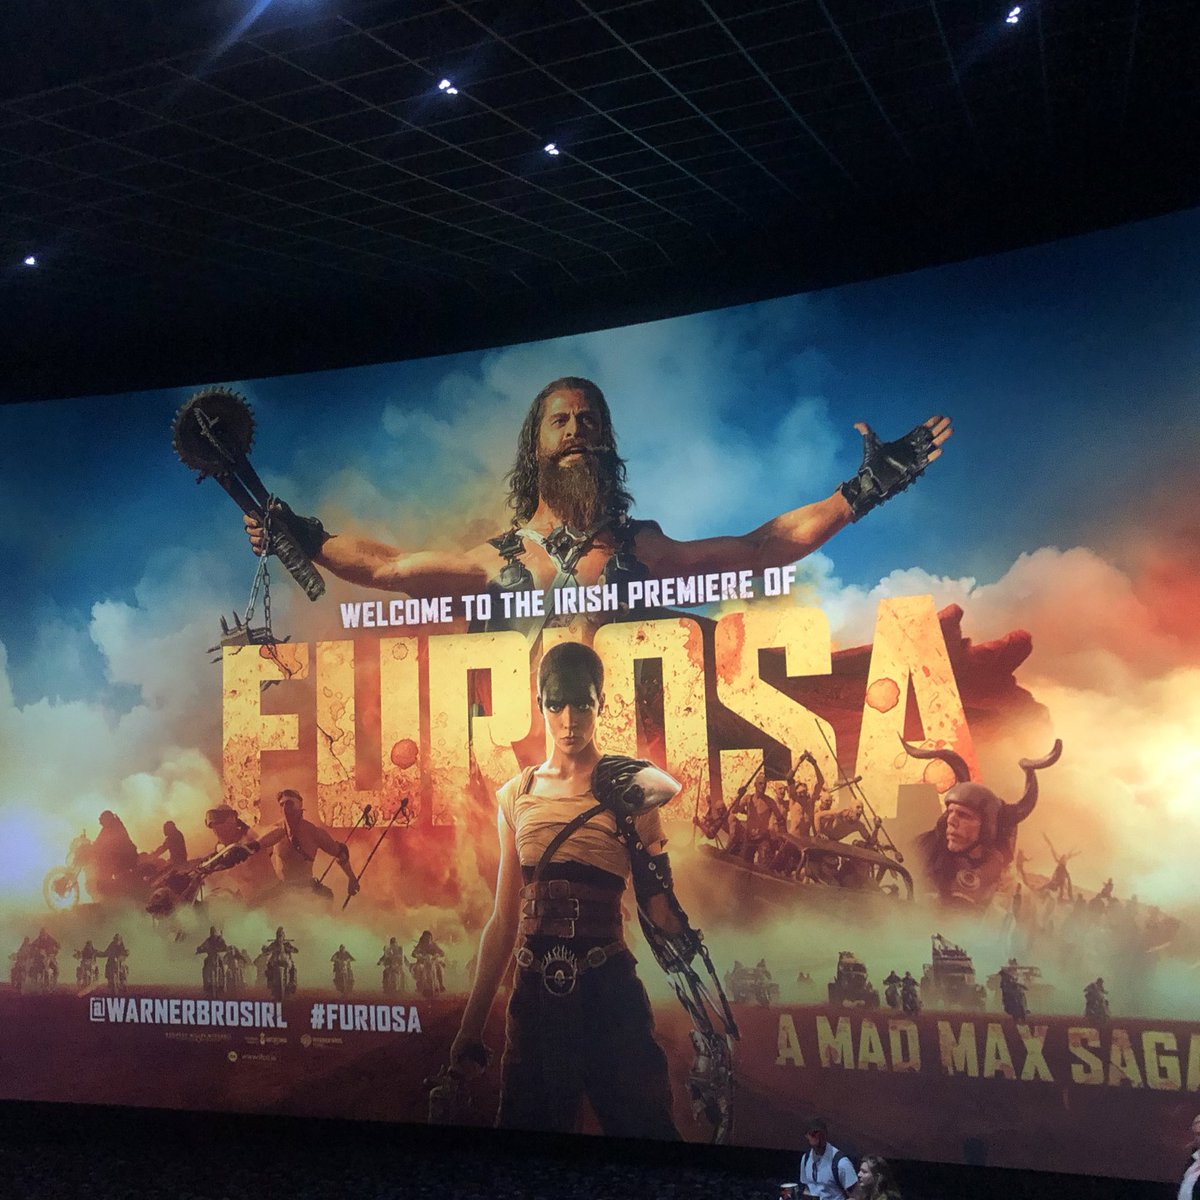 Academy members are attending the Irish premiere of #Furiosa tonight with thanks to @WarnerBrosIRL In cinemas this Friday